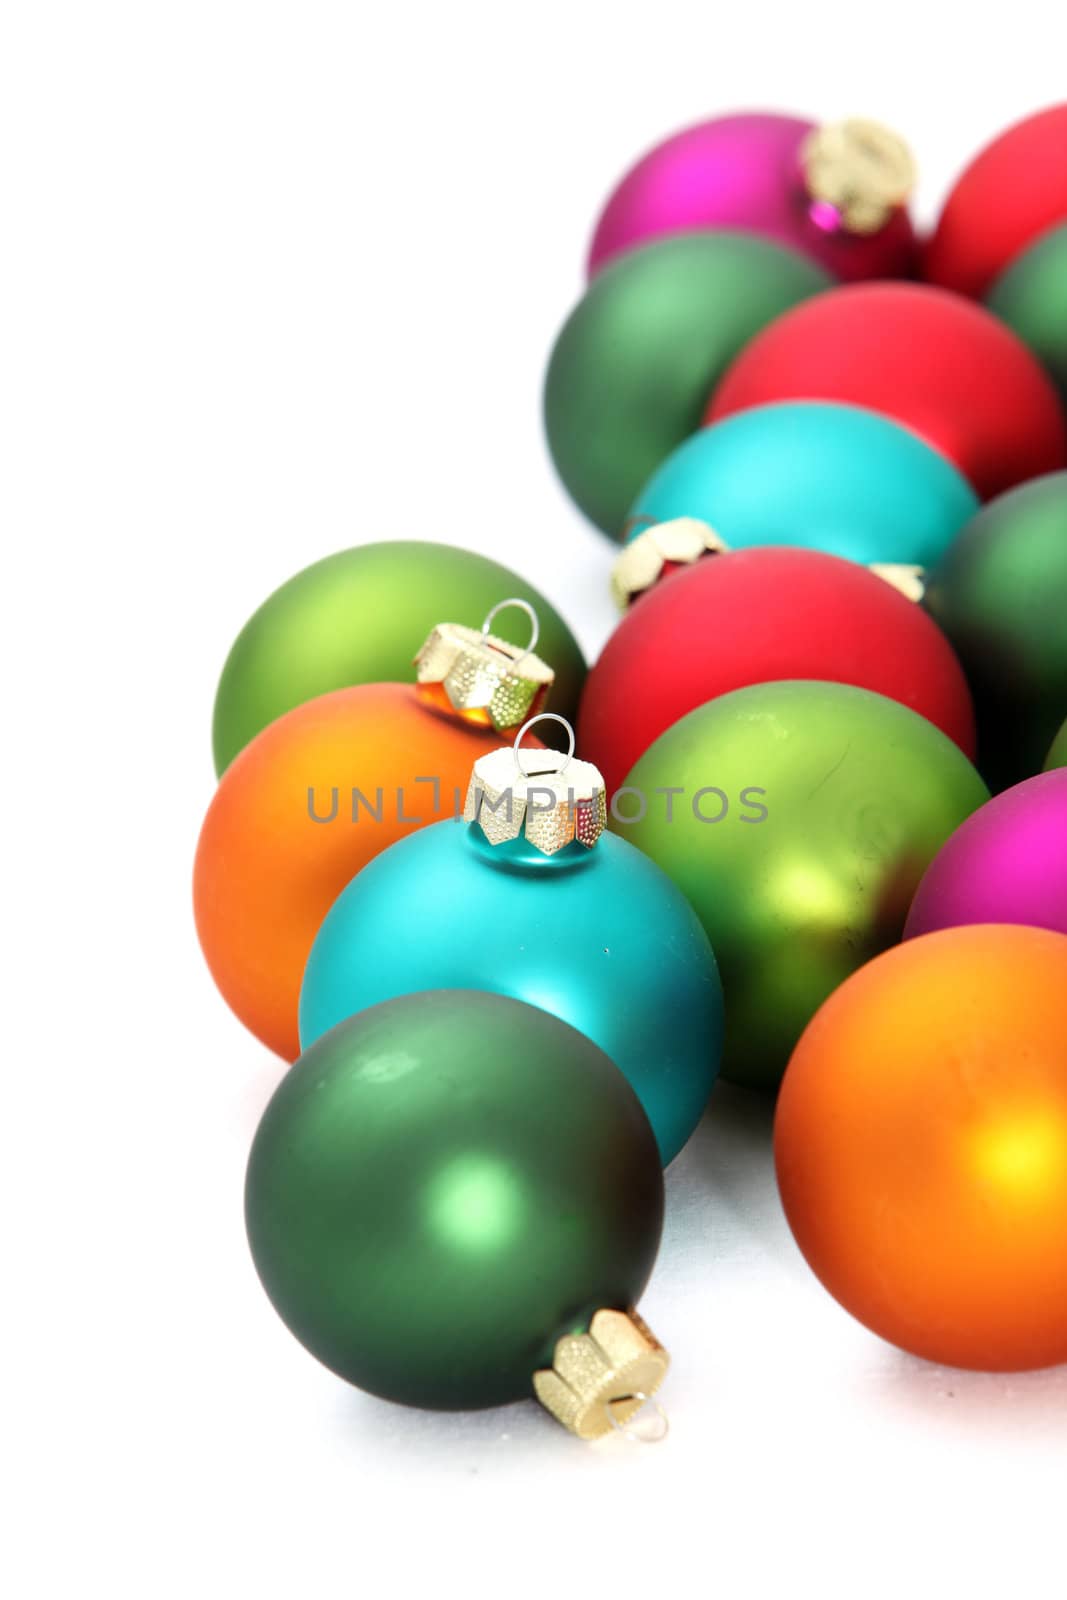 Colourful Christmas baubles over white by Farina6000